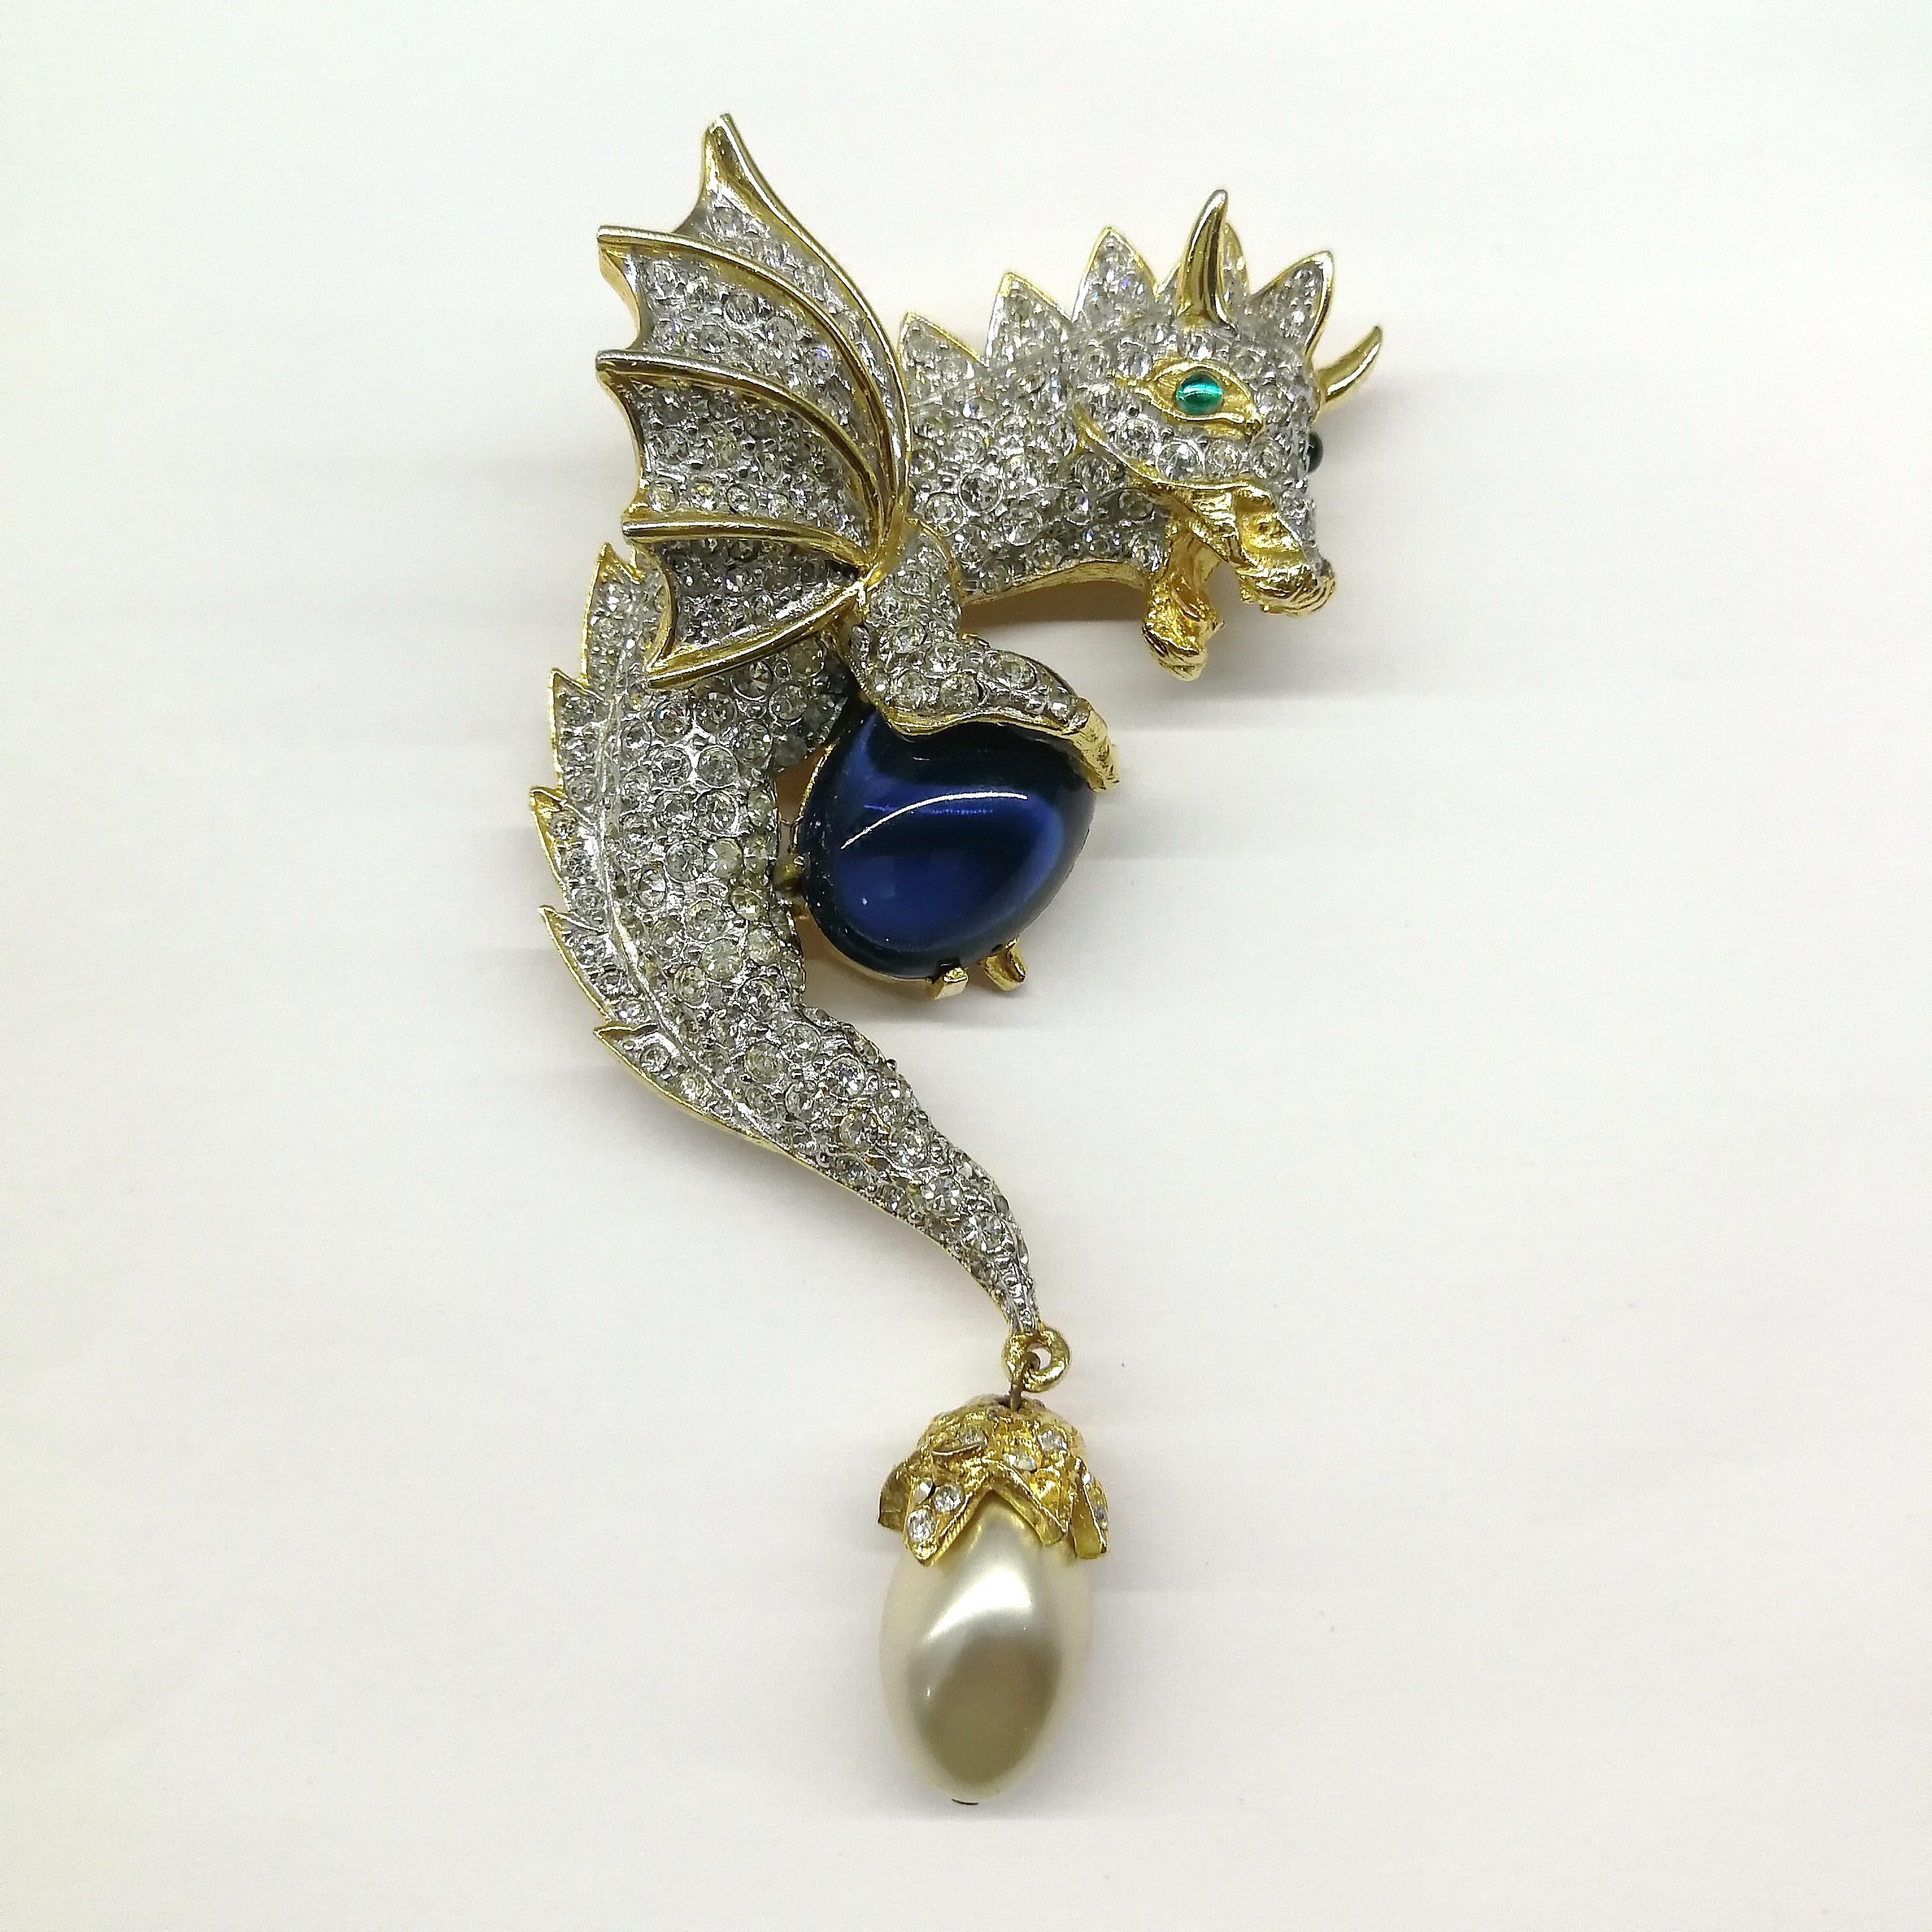 A magical and enchanting brooch from Ken Lane's heyday in the 1960's, a greedy dragon holding fast to his jewel, with a cheeky grin! With handset clear pastes, a large sapphire cabuchon 'jewel', a baroque pearl suspended from the tip of his tail,